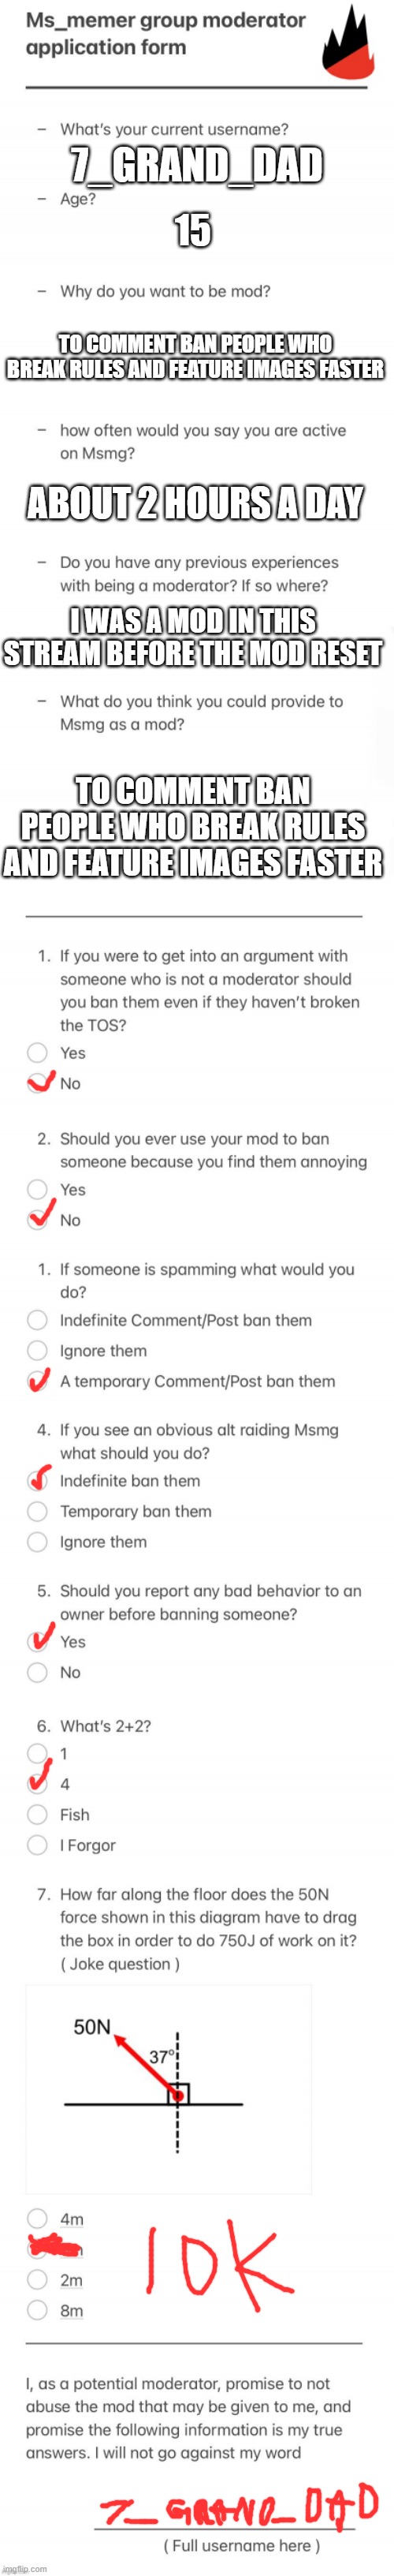 UPDATED MSMG MOD FORM | 7_GRAND_DAD; 15; TO COMMENT BAN PEOPLE WHO BREAK RULES AND FEATURE IMAGES FASTER; ABOUT 2 HOURS A DAY; I WAS A MOD IN THIS STREAM BEFORE THE MOD RESET; TO COMMENT BAN PEOPLE WHO BREAK RULES AND FEATURE IMAGES FASTER | image tagged in updated msmg mod form | made w/ Imgflip meme maker